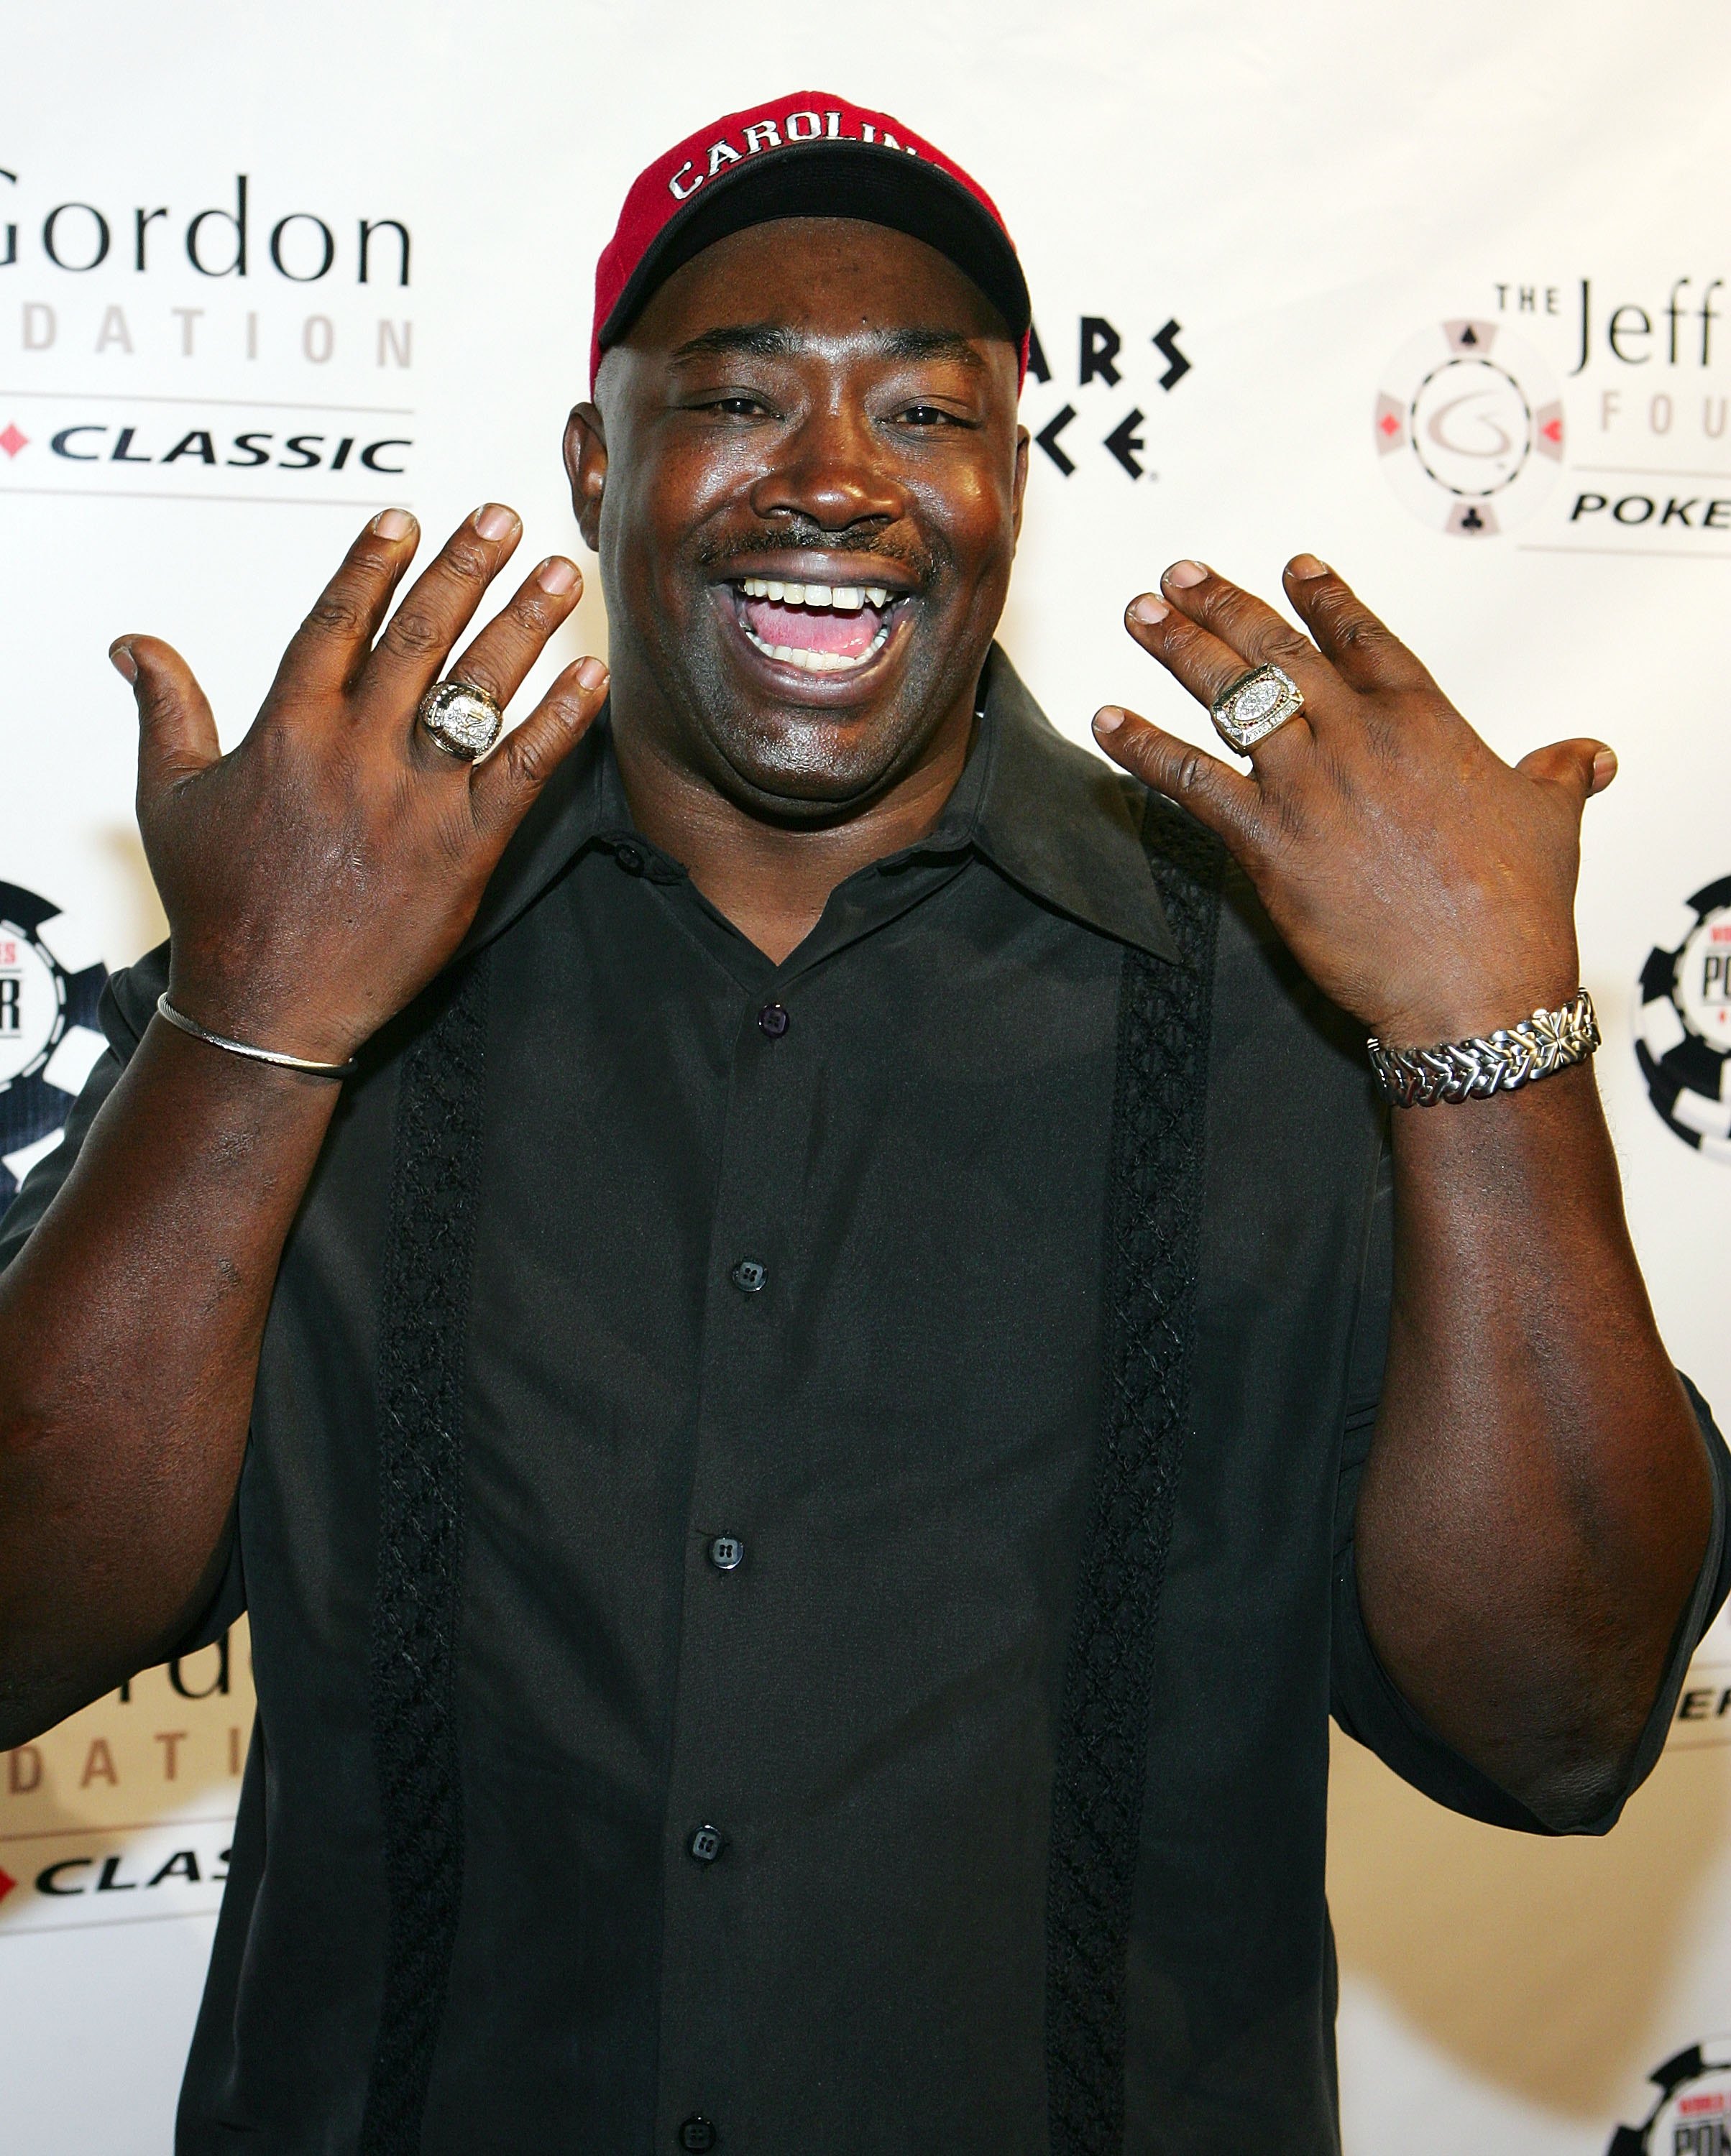 LAS VEGAS, NV - MARCH 08:  Former NFL player and Heisman Trophy winner George Rogers arrives at the Jeff Gordon Foundation Poker Classic at Caesars Palace Marsh 8, 2006 in Las Vegas, Nevada. The foundation benefits several charities dedicated to helping c